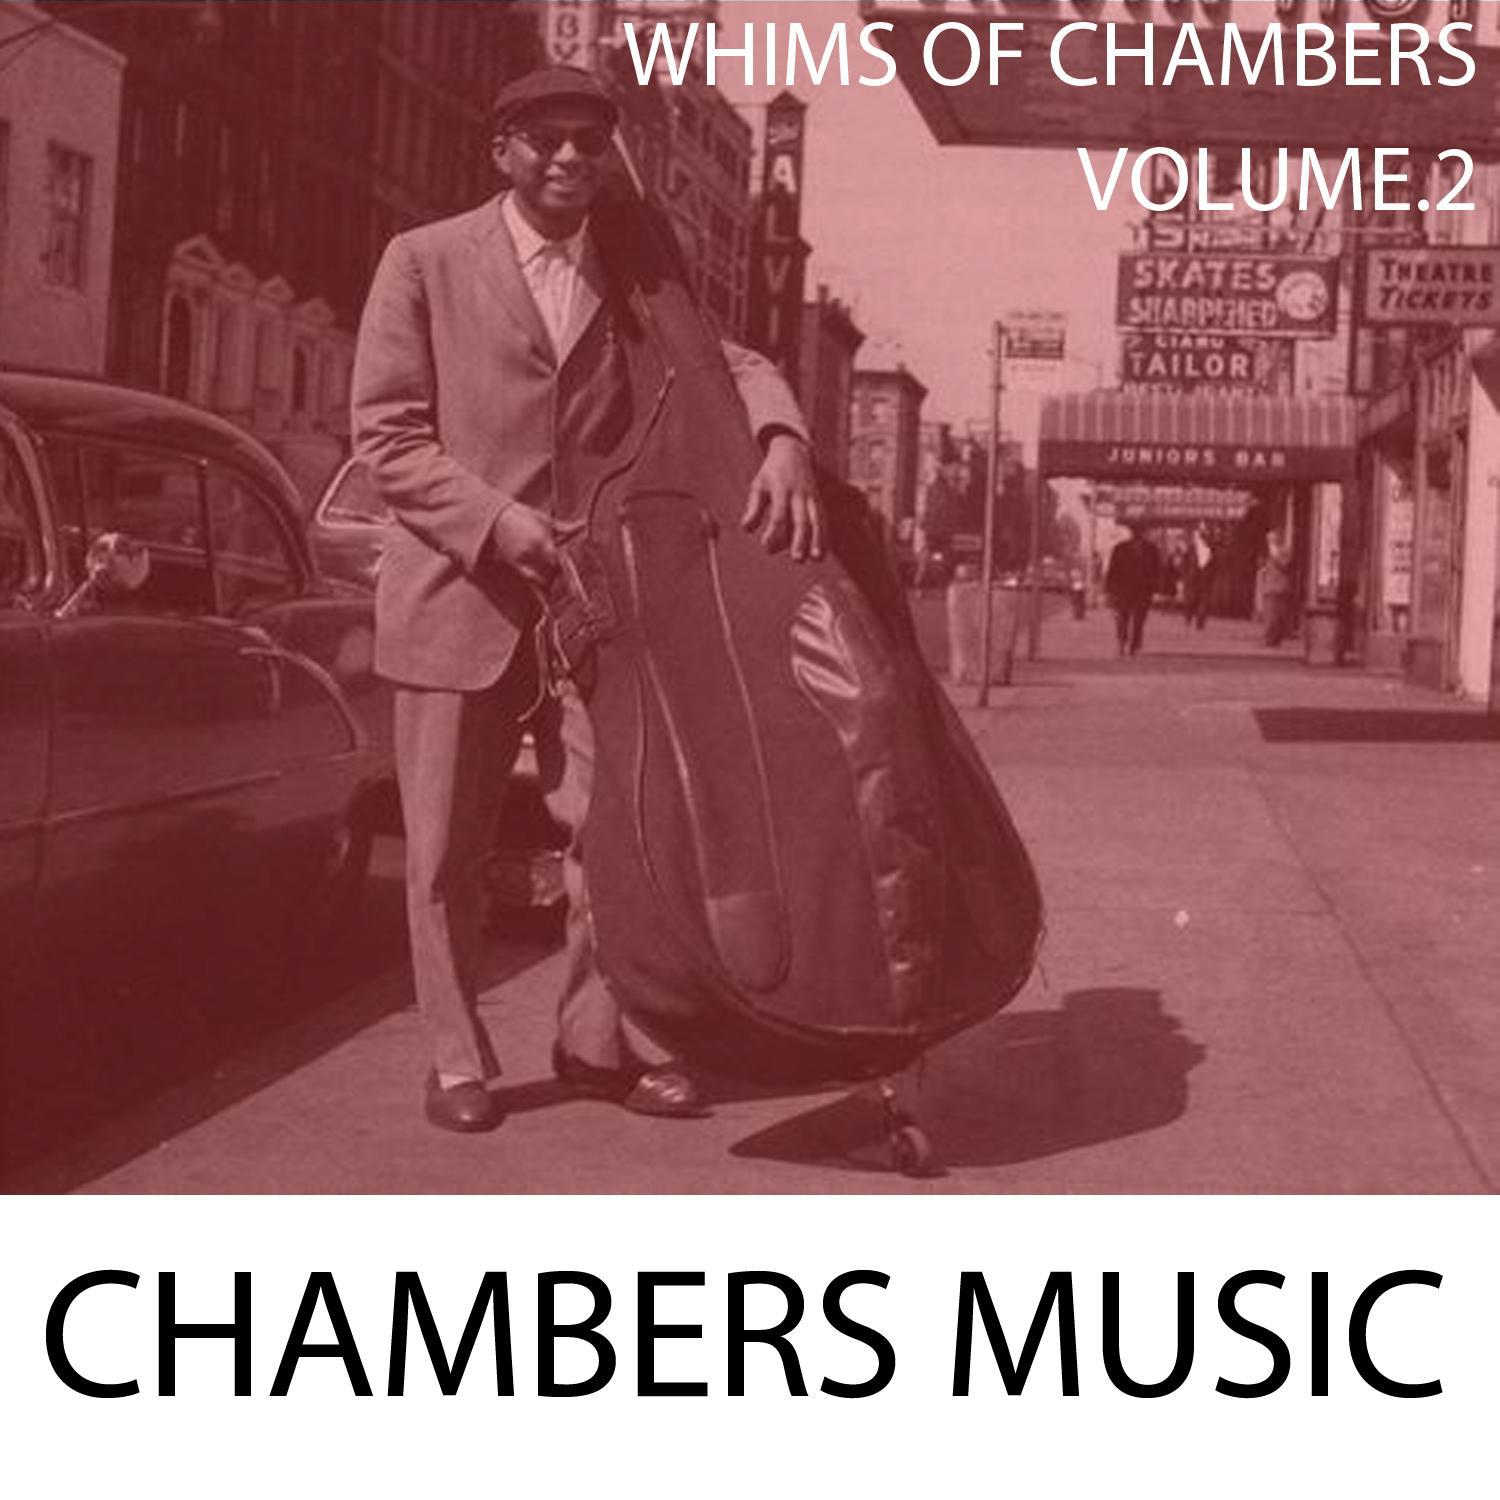 Classic Chambers, Vol. 2: Whims of Chambers